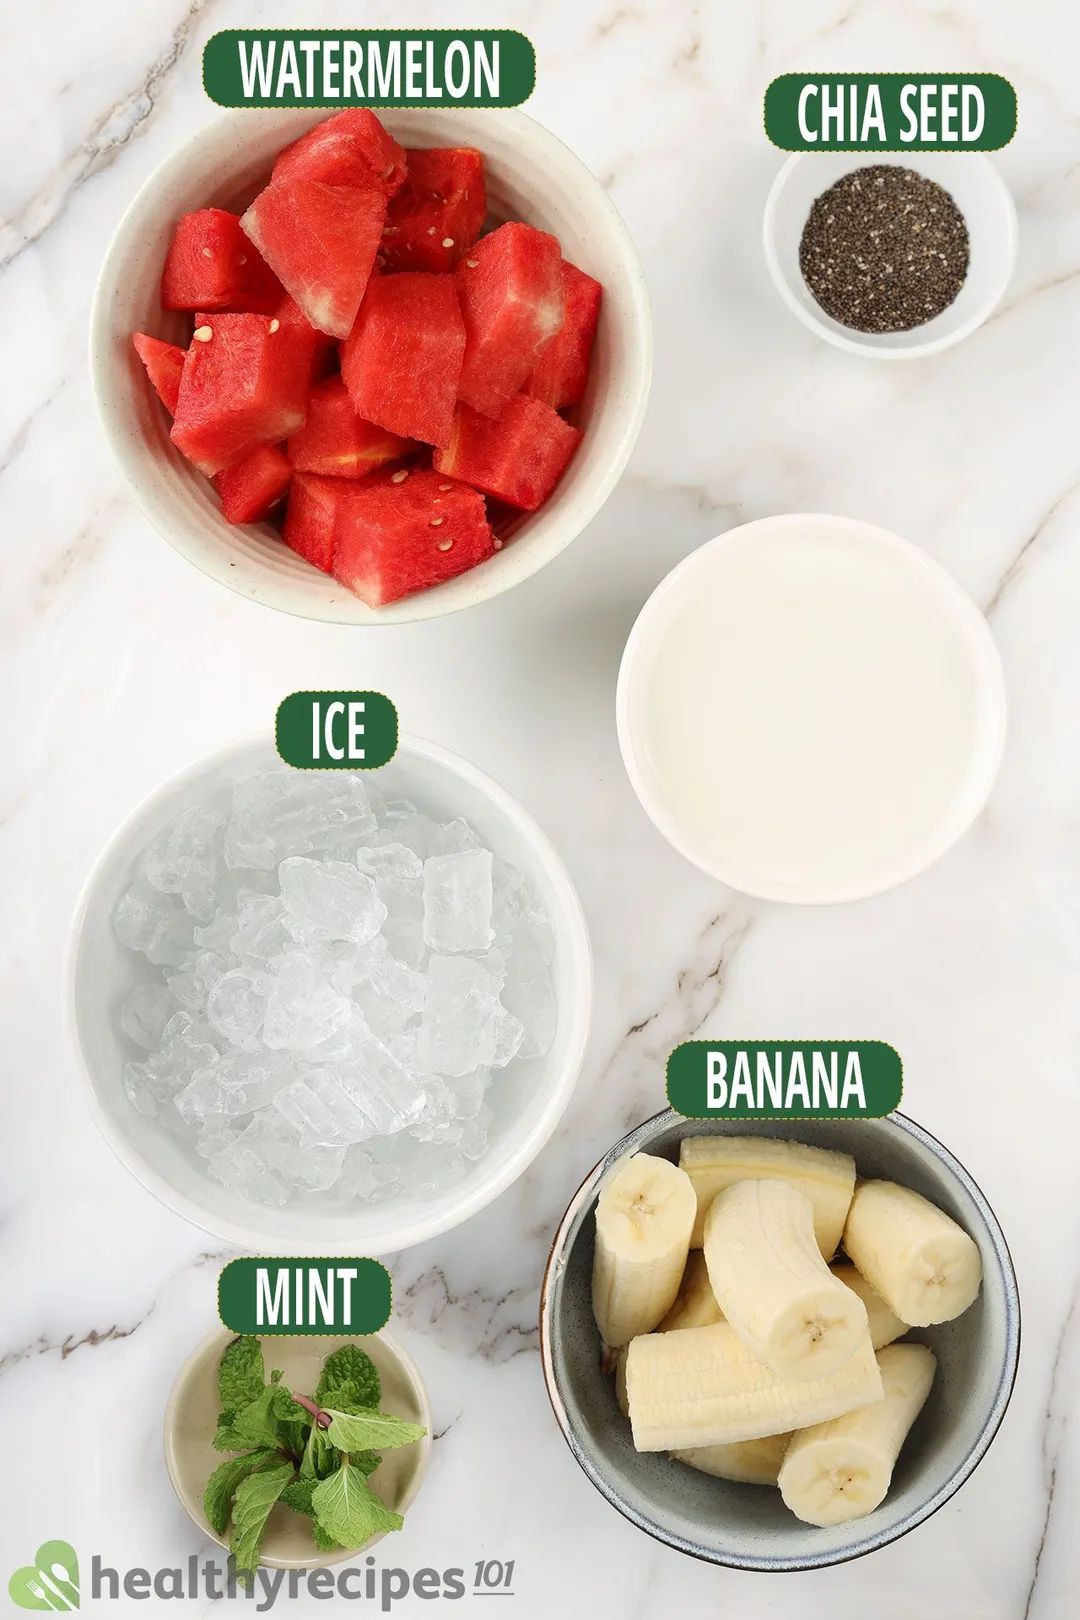 Ingredients for Watermelon Banana Smoothie, including bowls of watermelon slices, chia seeds, ice, peeled bananas, mint leaves, and milk.